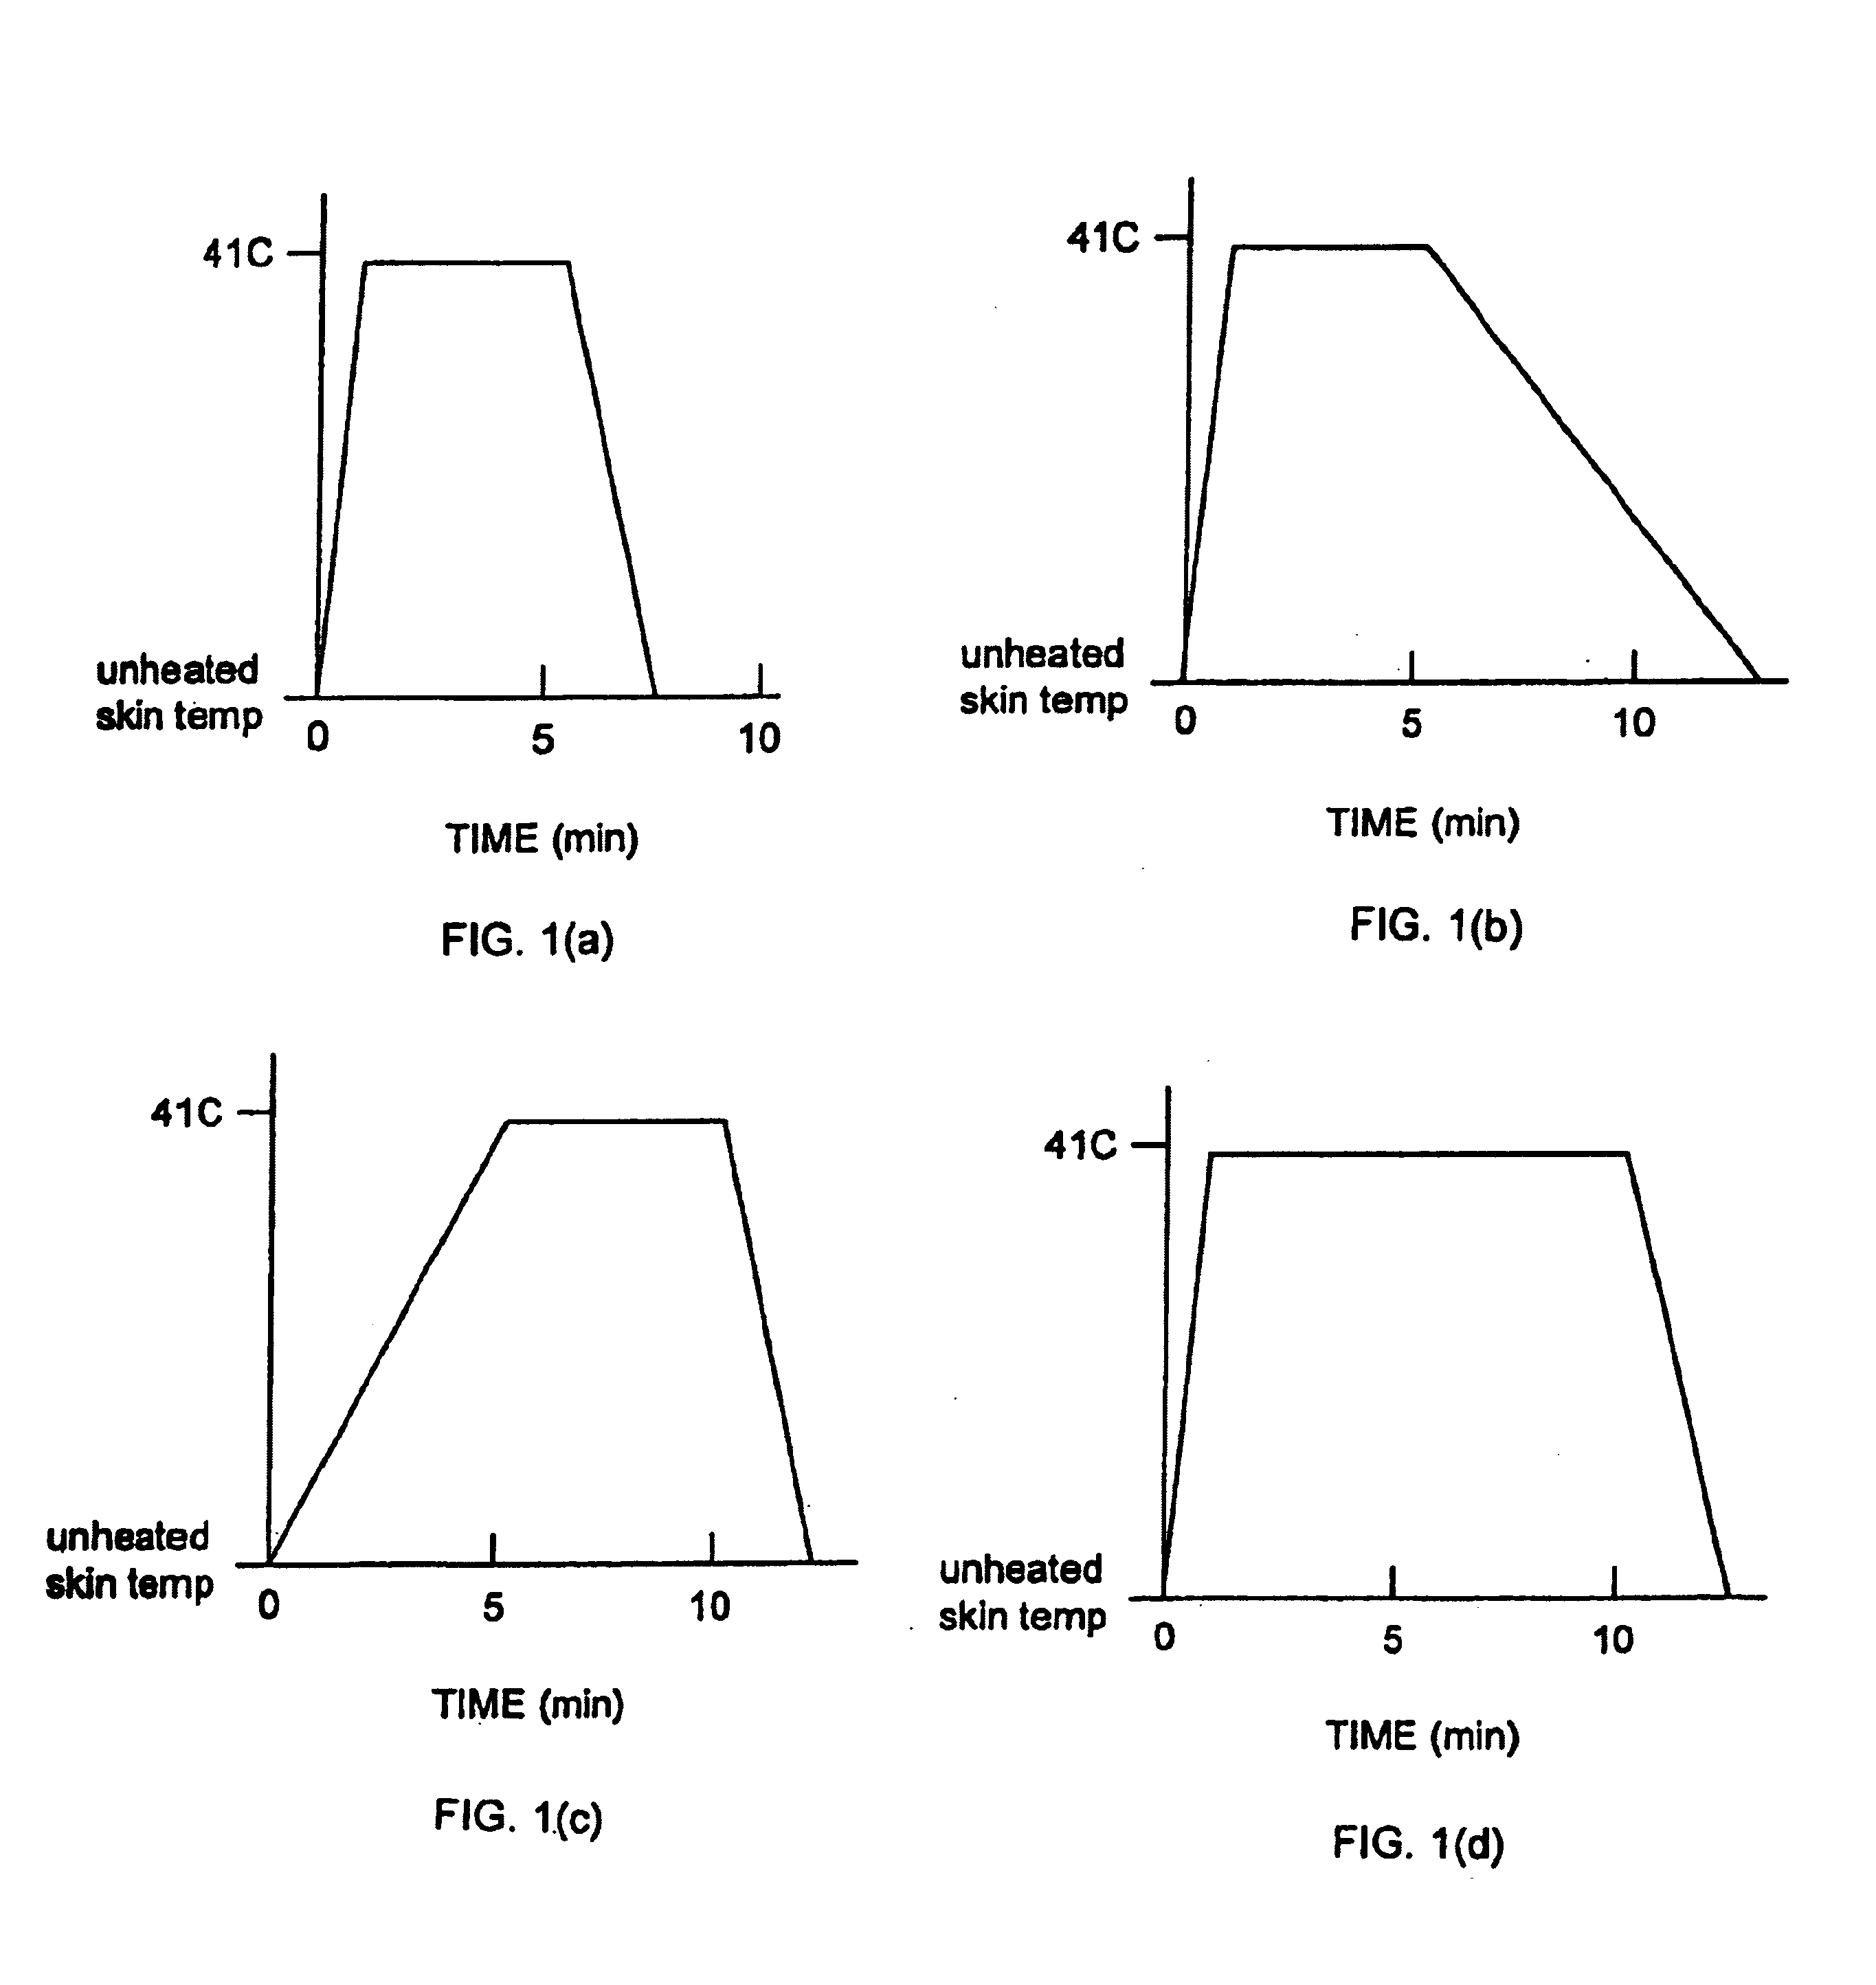 Methods and apparatus for using controlled heat to regulate transdermal and controlled release delivery of fentanyl, other analgesics, and other medical substances